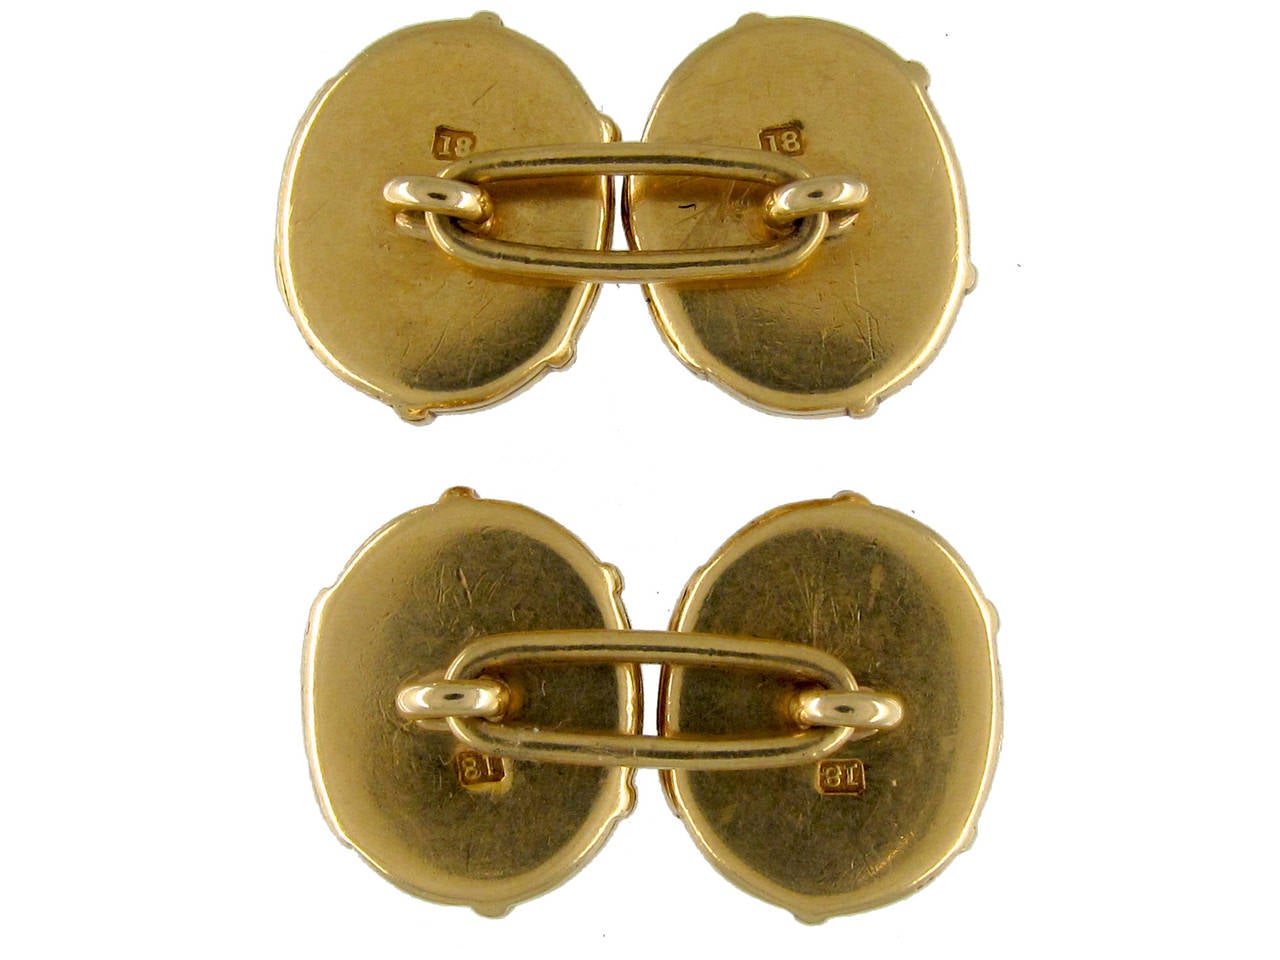 An extremely unusual pair of beautifully made locket cufflinks. Each face opens out, making four lockets in total. They are in 18 carat yellow gold and a good weight.